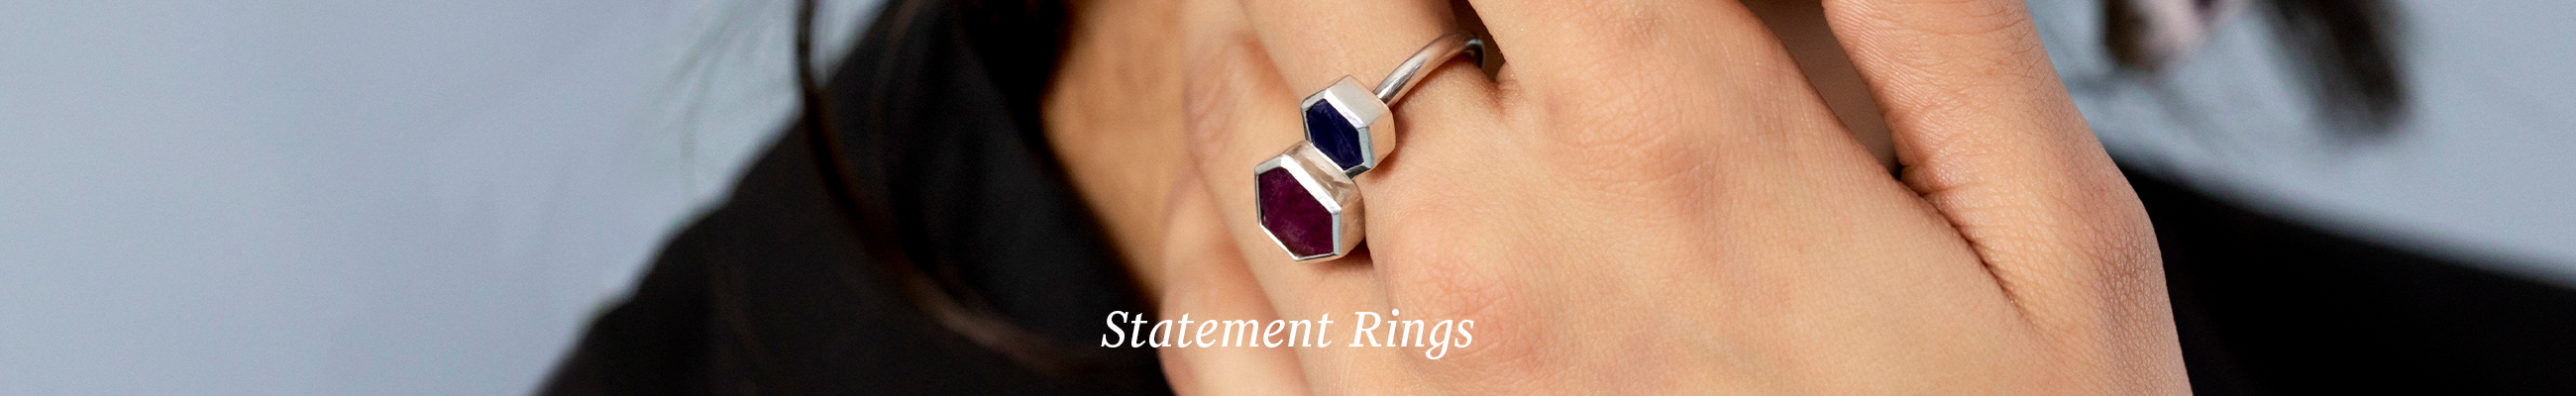 68158398-17cf-4a09-b10e-01c3c83e9cacCollection_Banner_Rings_Statement.jpg